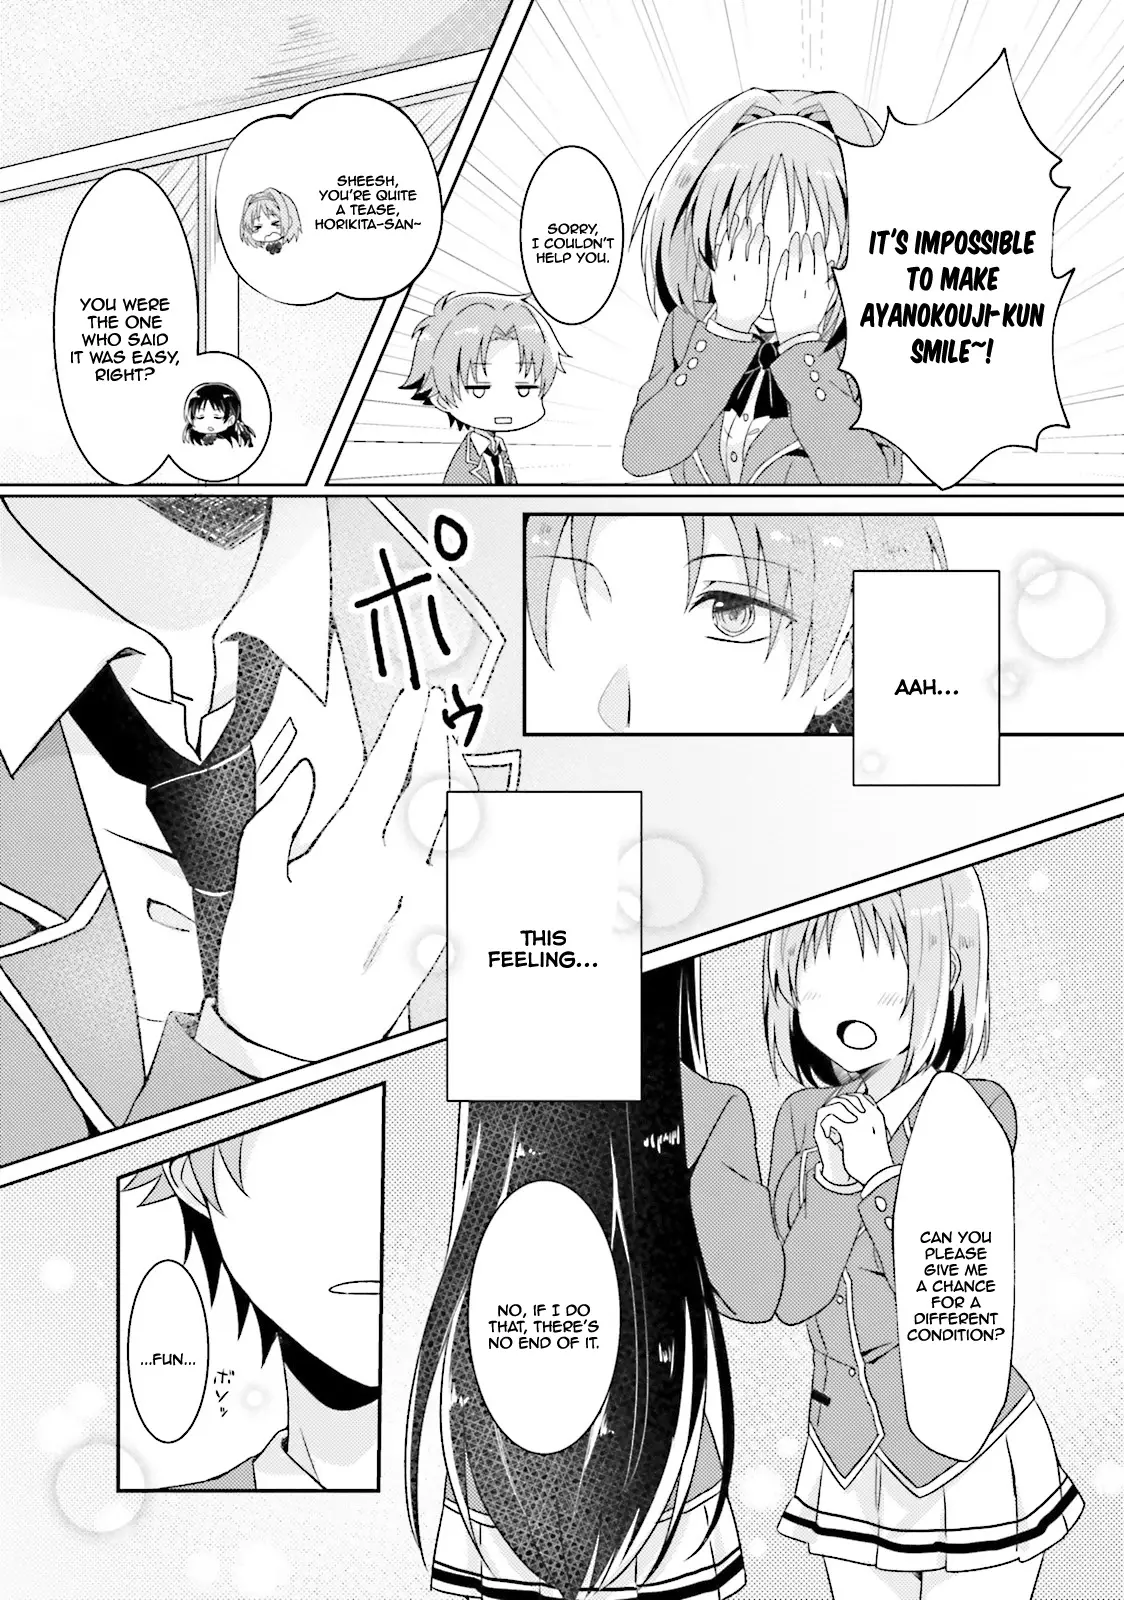 Welcome To The Classroom Of The Supreme Ability Doctrine: Other School Days - 3 page 7-46613dfc